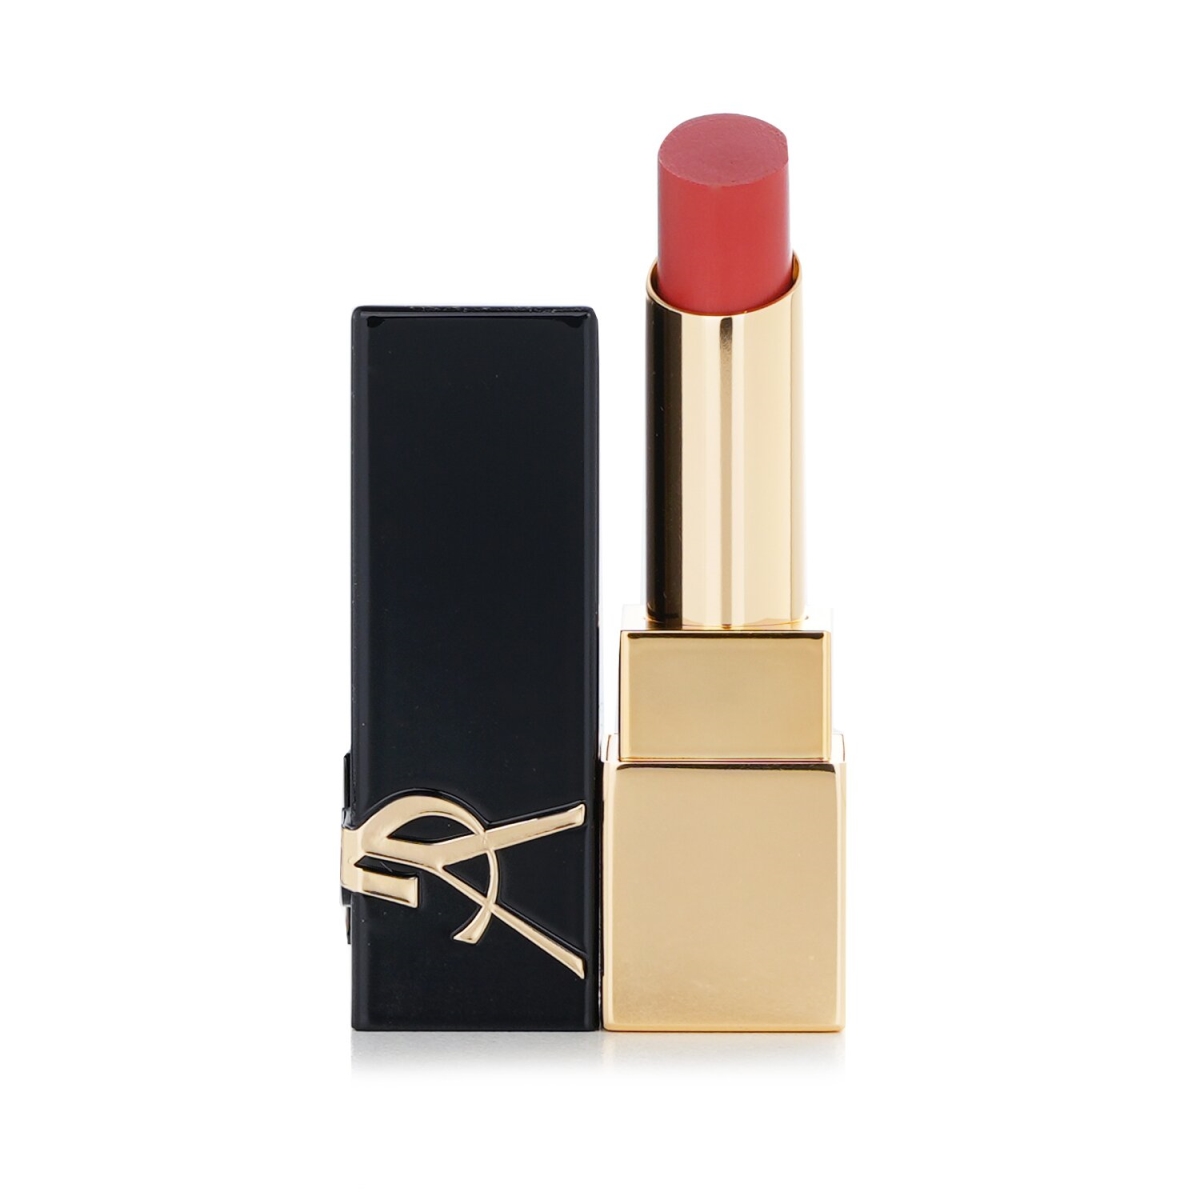 Picture of Yves Saint Laurent 279505 0.11 oz Rouge Pur Couture the Bold Lipstick, No.10 Brazen Nude